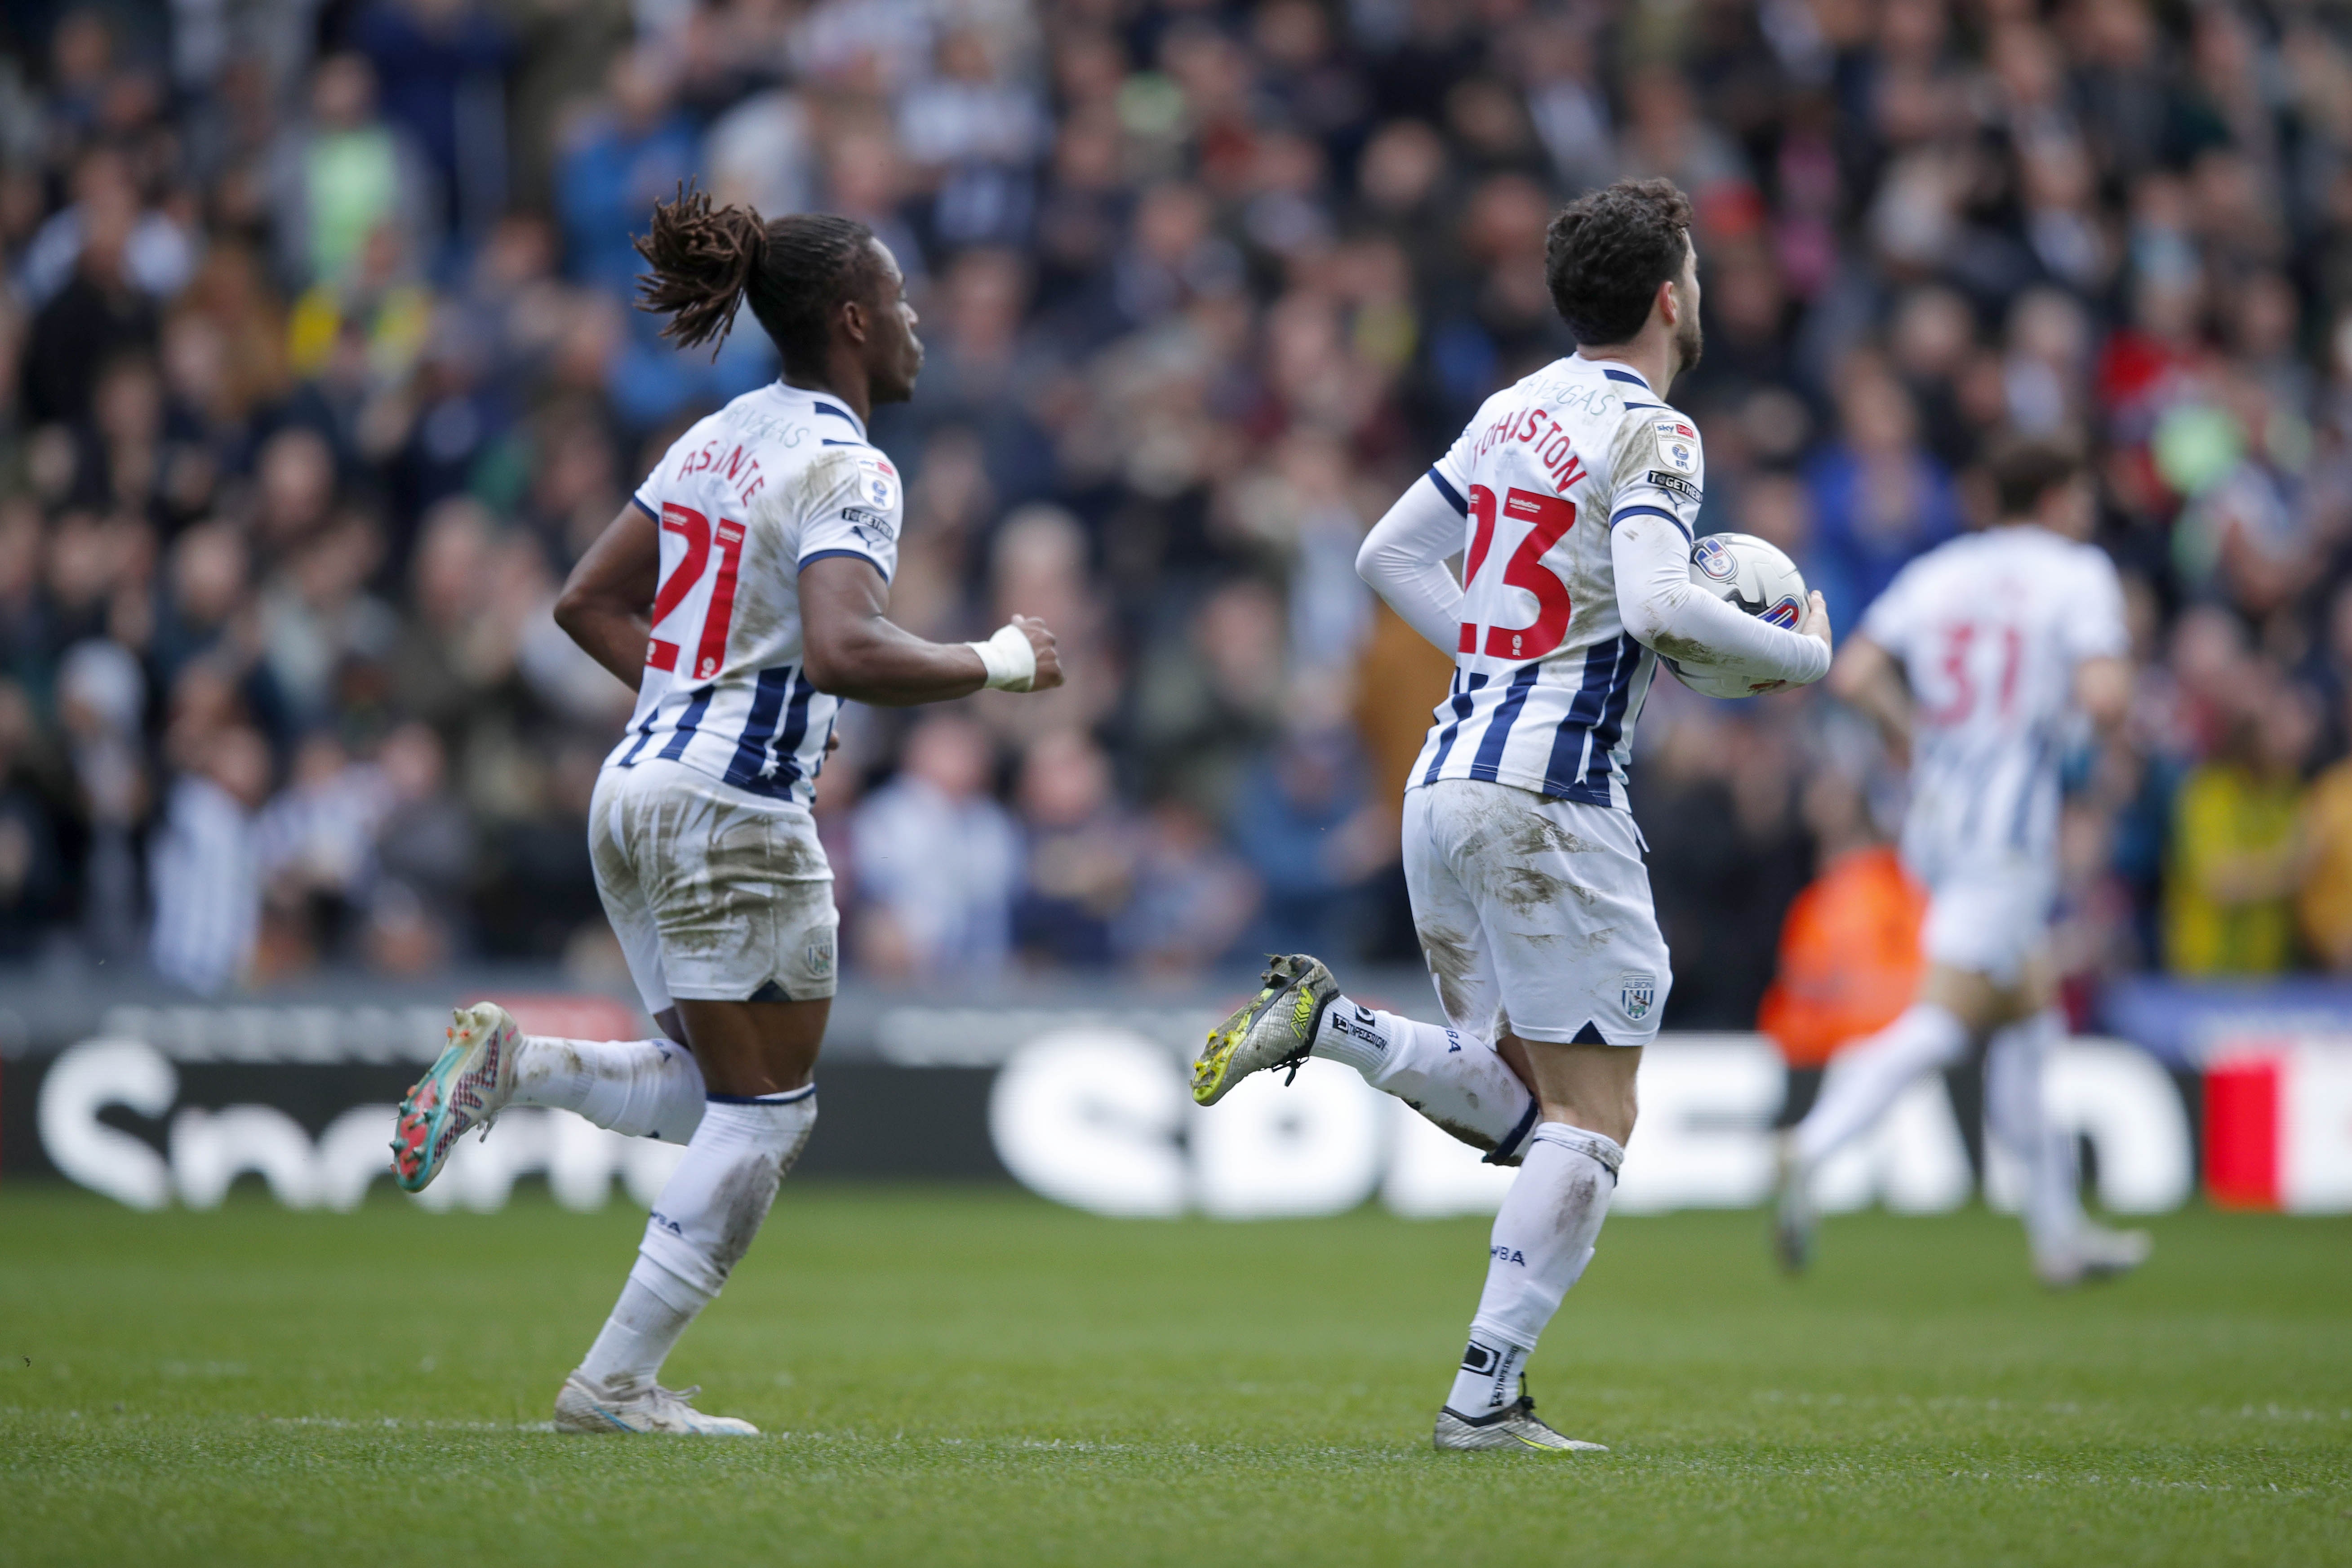 Brandon Thomas-Asante and Mikey Johnston run back into position after Brandon's goal against Watford 